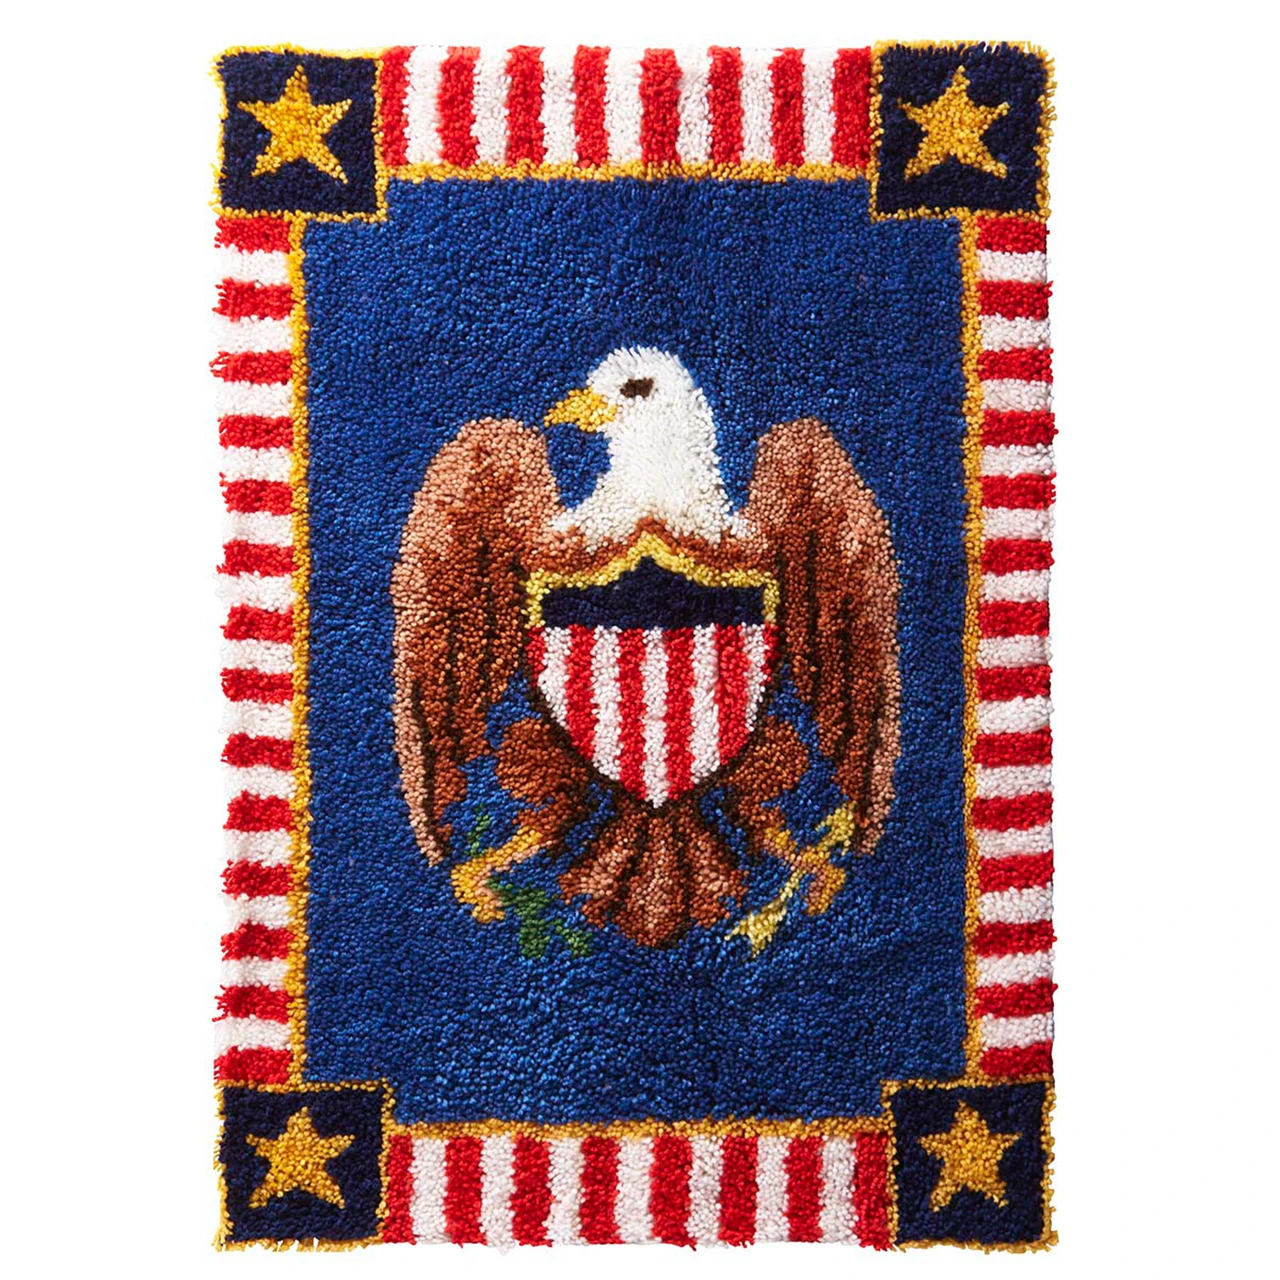 

Latch Hook Rug Eagle Patriotic Pride Wall Tapestry DIY Carpet Rug Pre-Printed Canvas with Non-Skid Backing Floor Mat 69x102cm